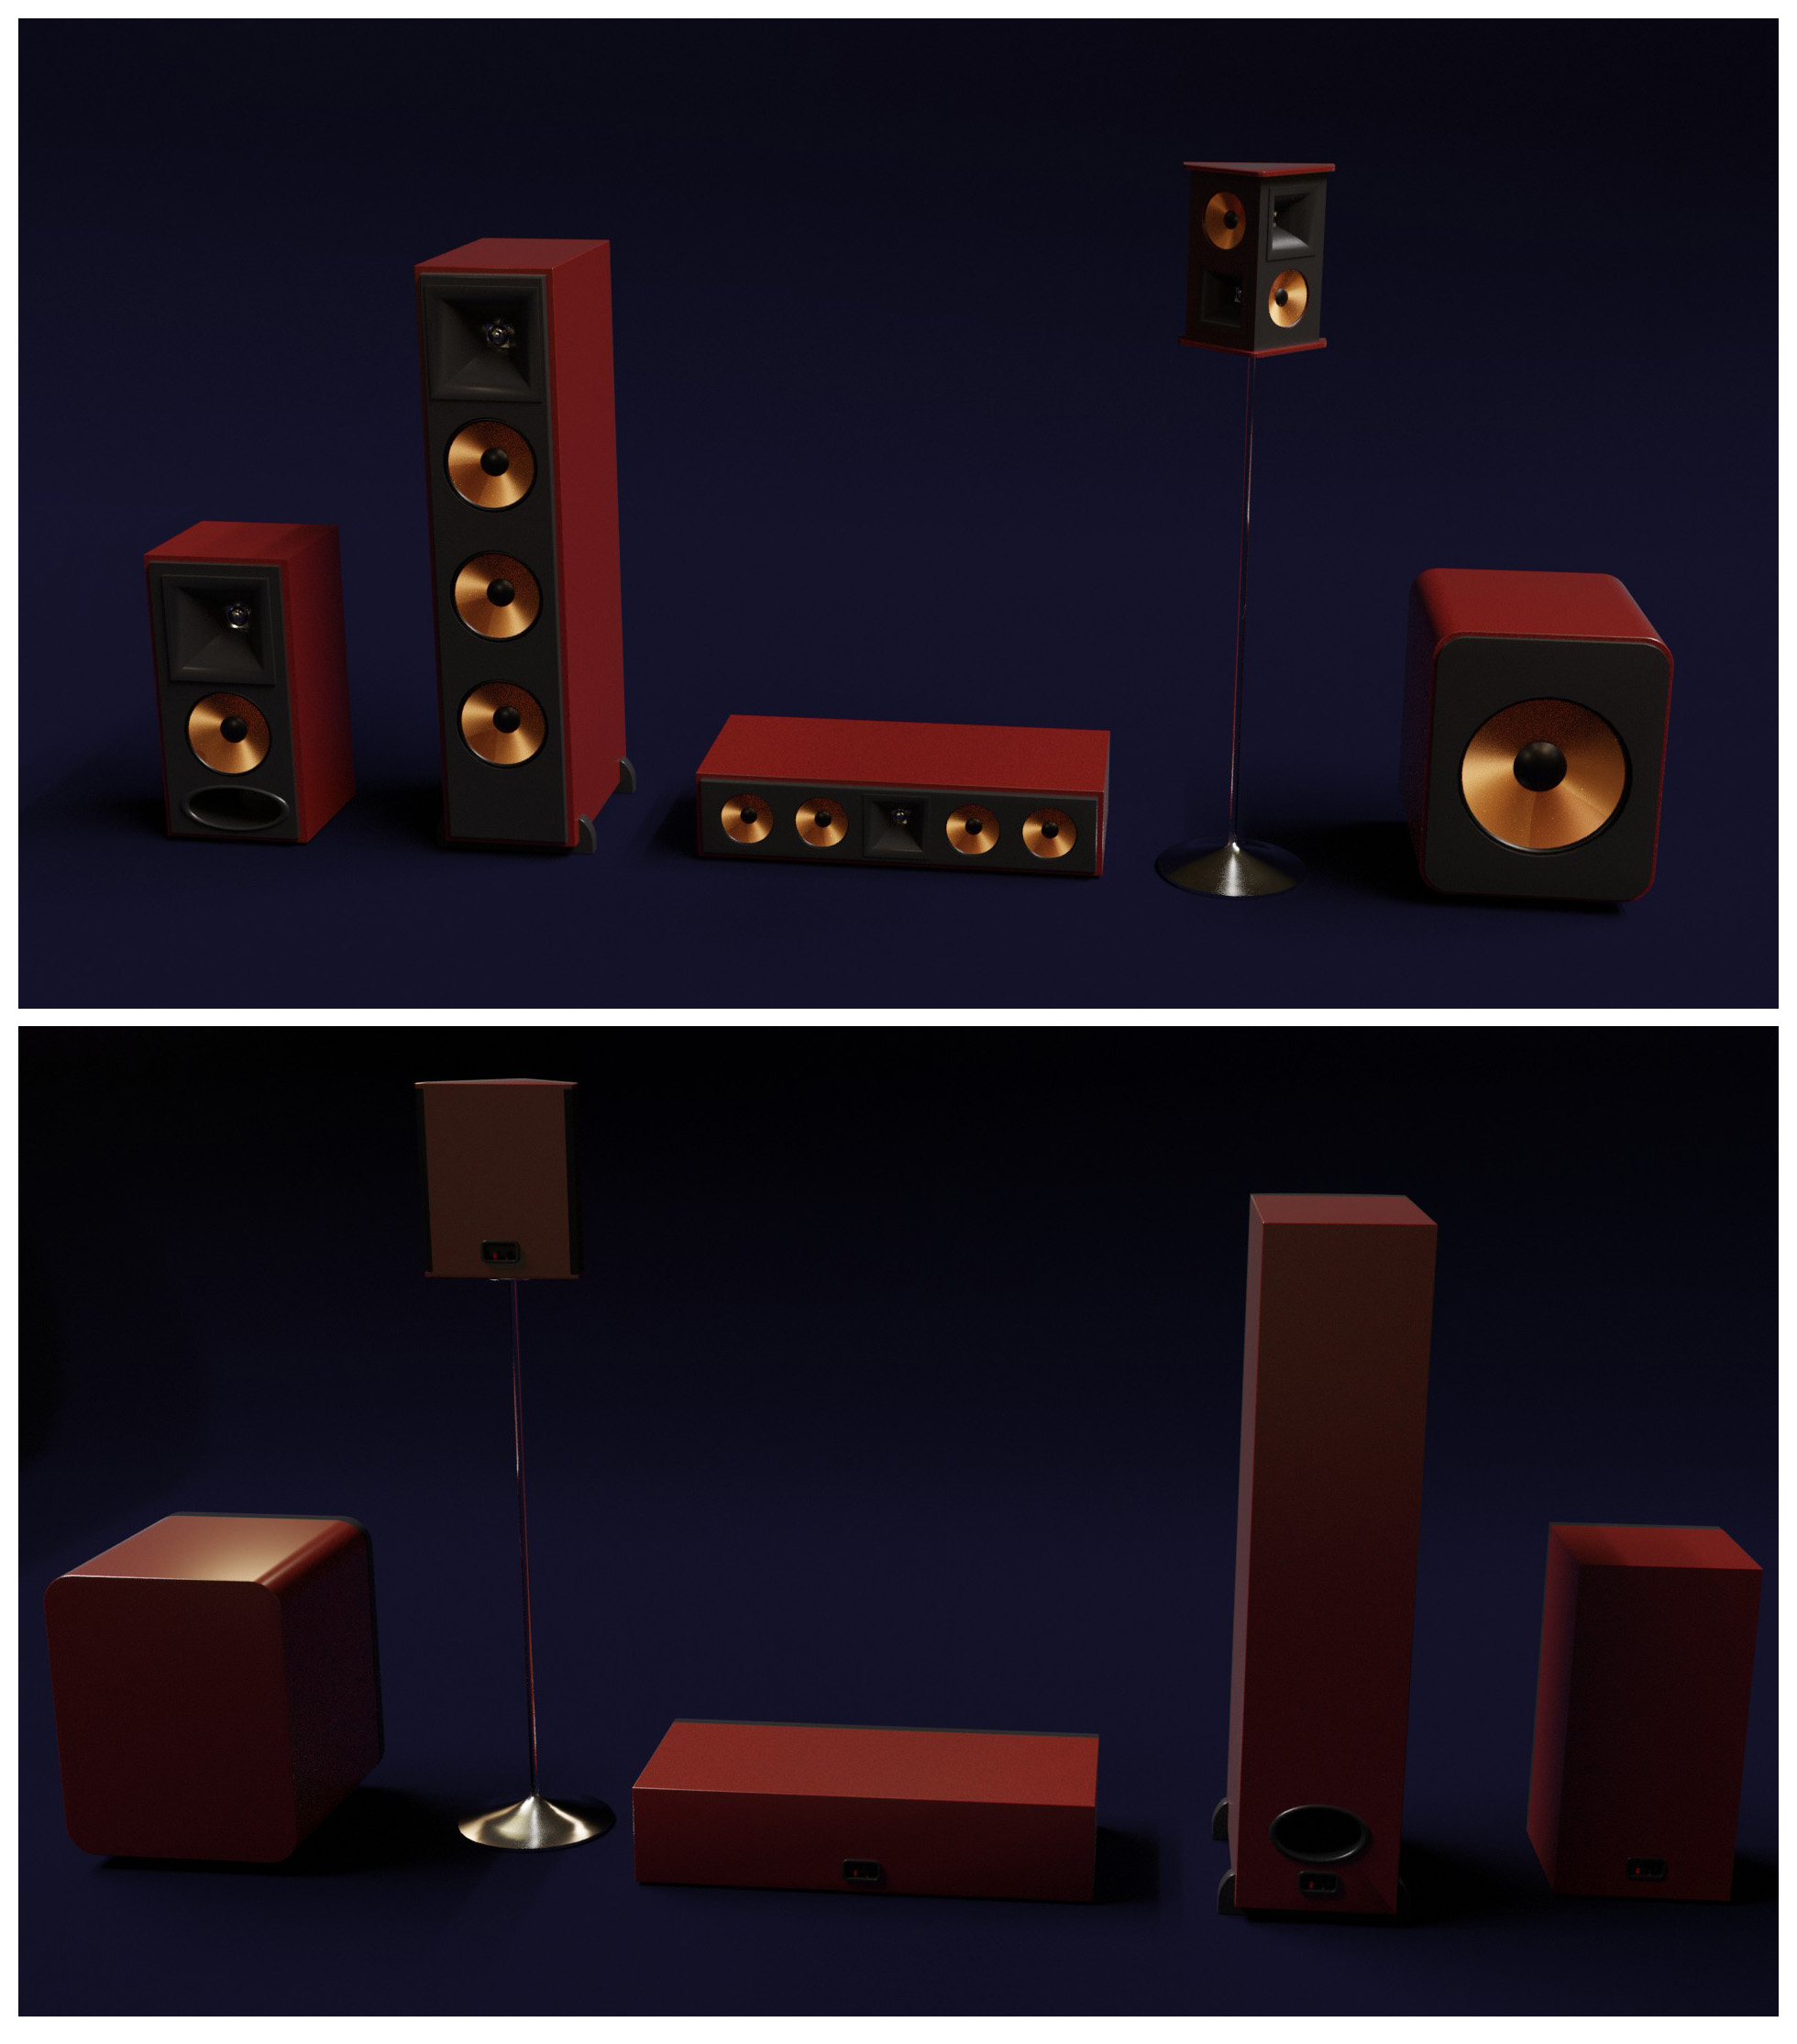 Klipsch Home Theater Speakers preview image 2